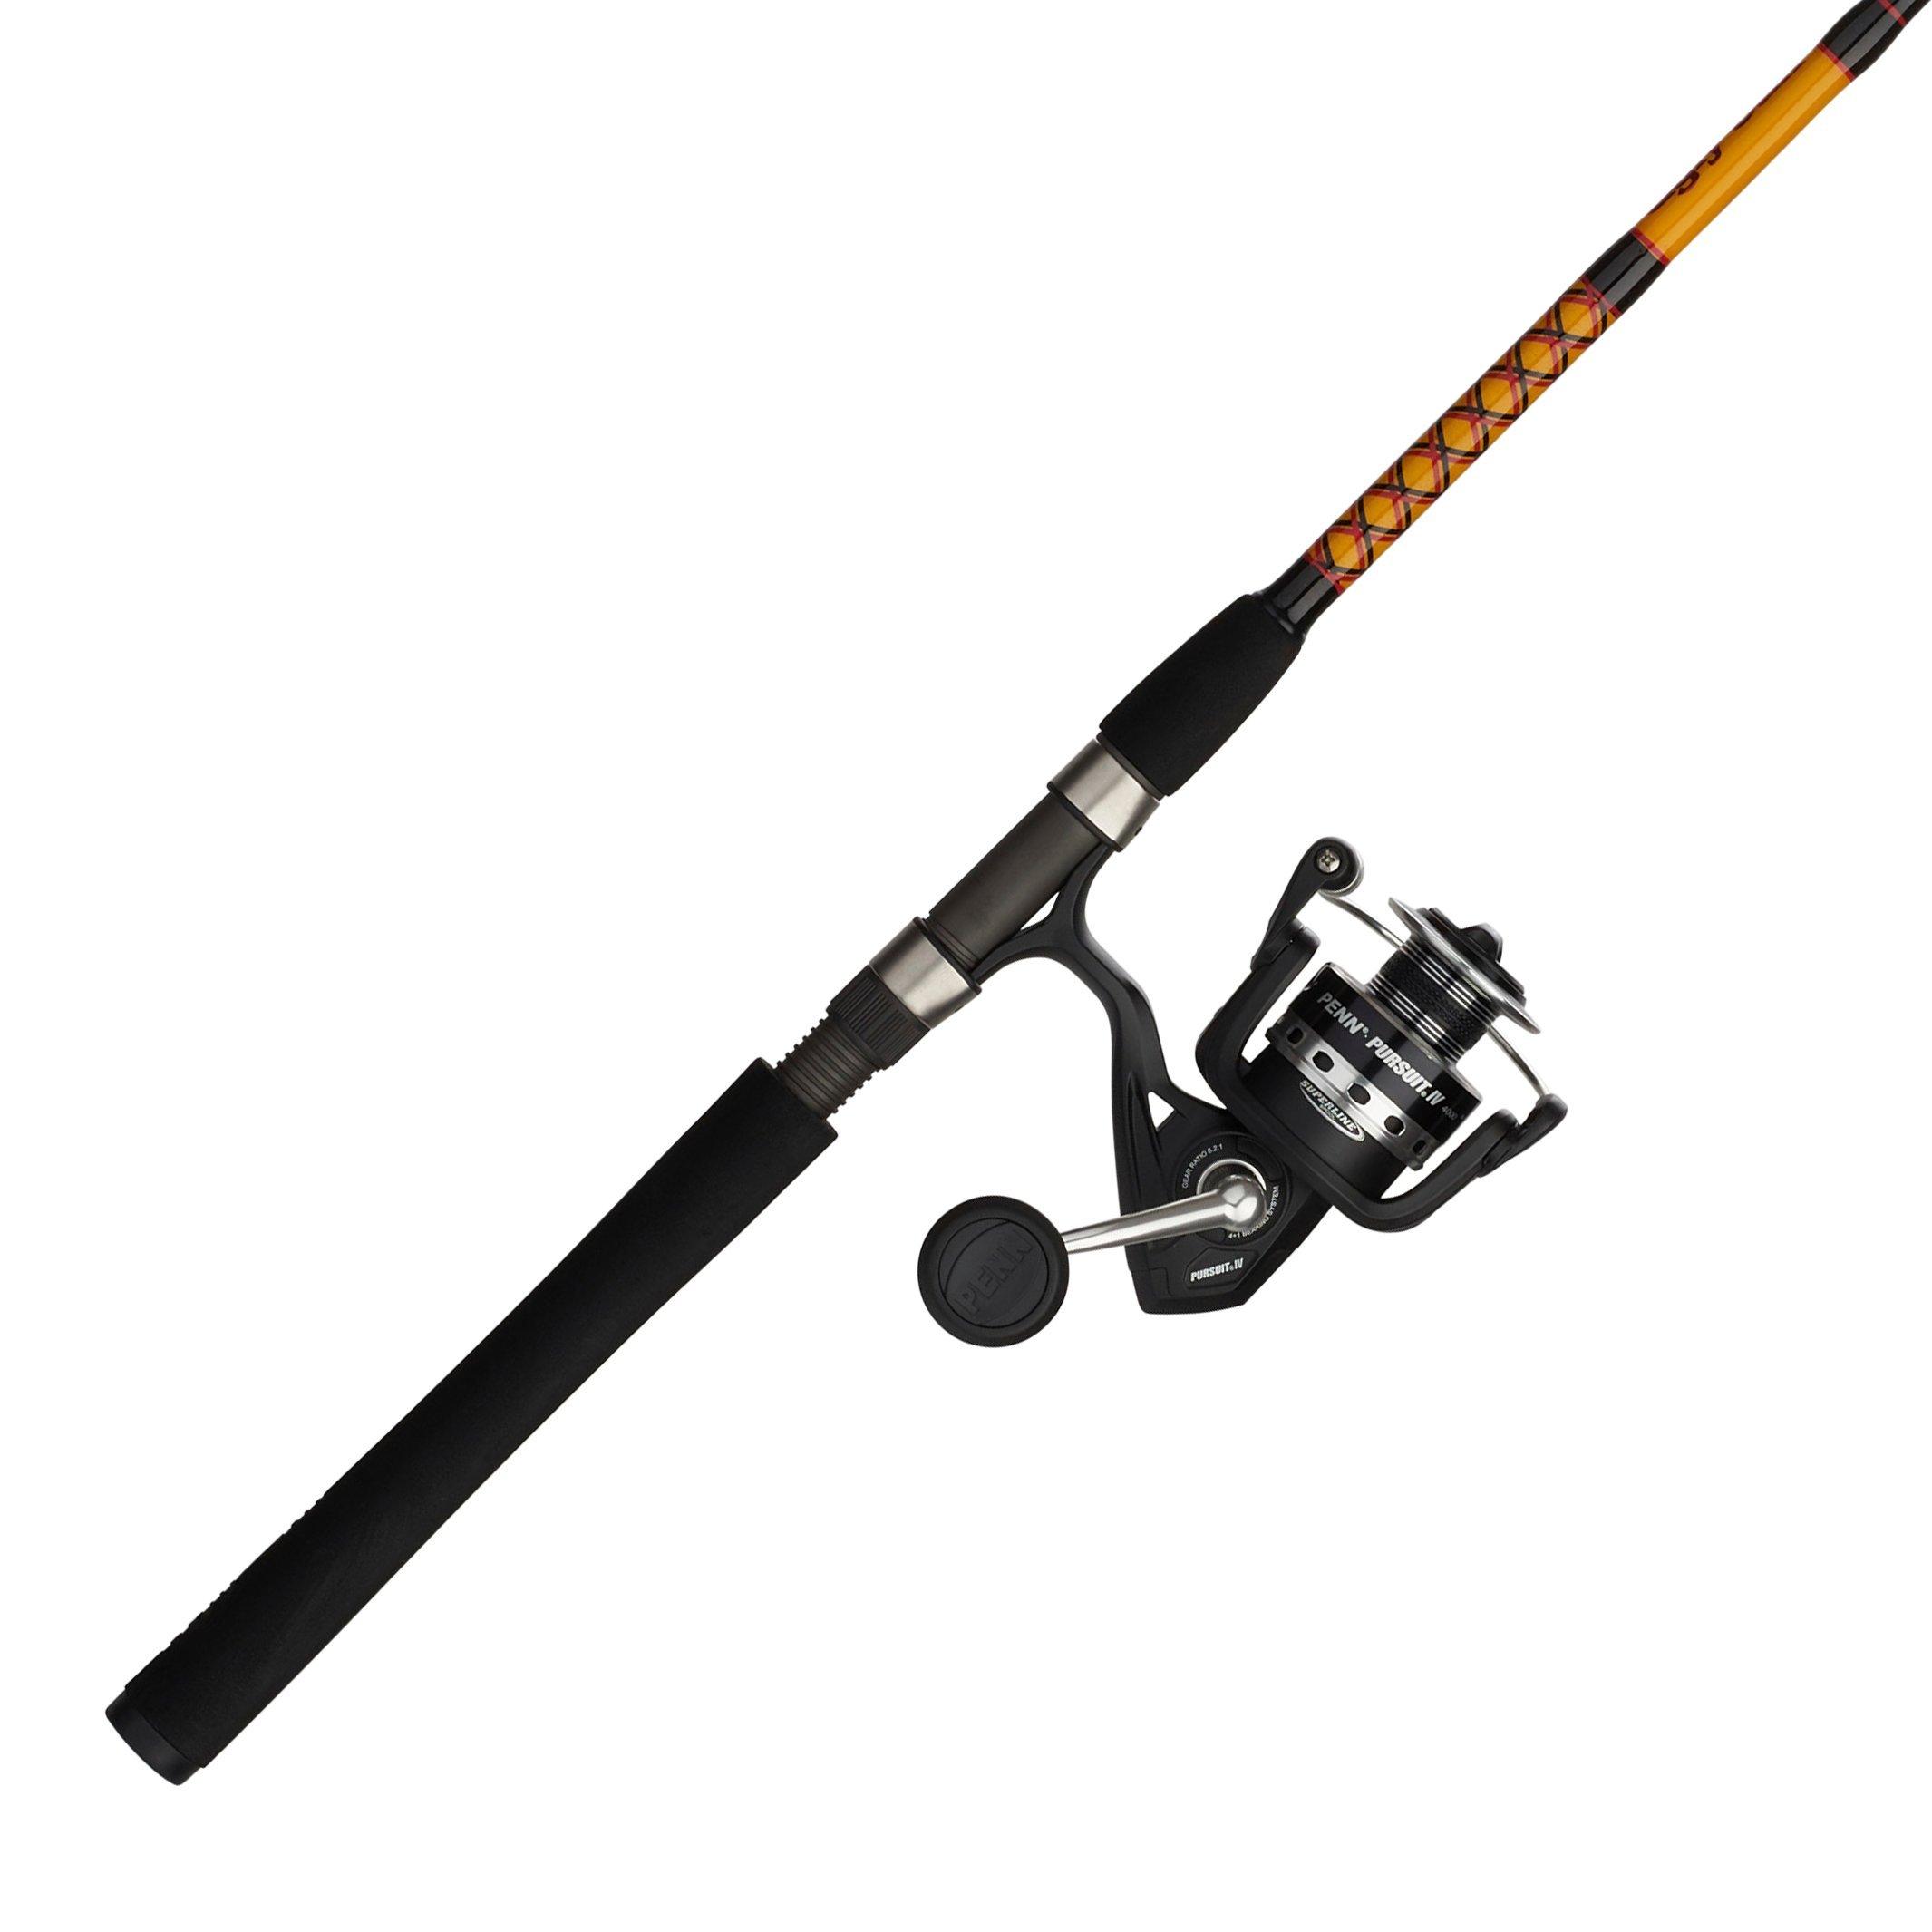  Ugly Stik Bigwater Spinning Reel and Fishing Rod Combo & Penn  10' Pursuit IV 2-Piece Fishing Rod and Reel Surf Spinning Combos, 10', 2  Graphite Composite Fishing Rod with 5